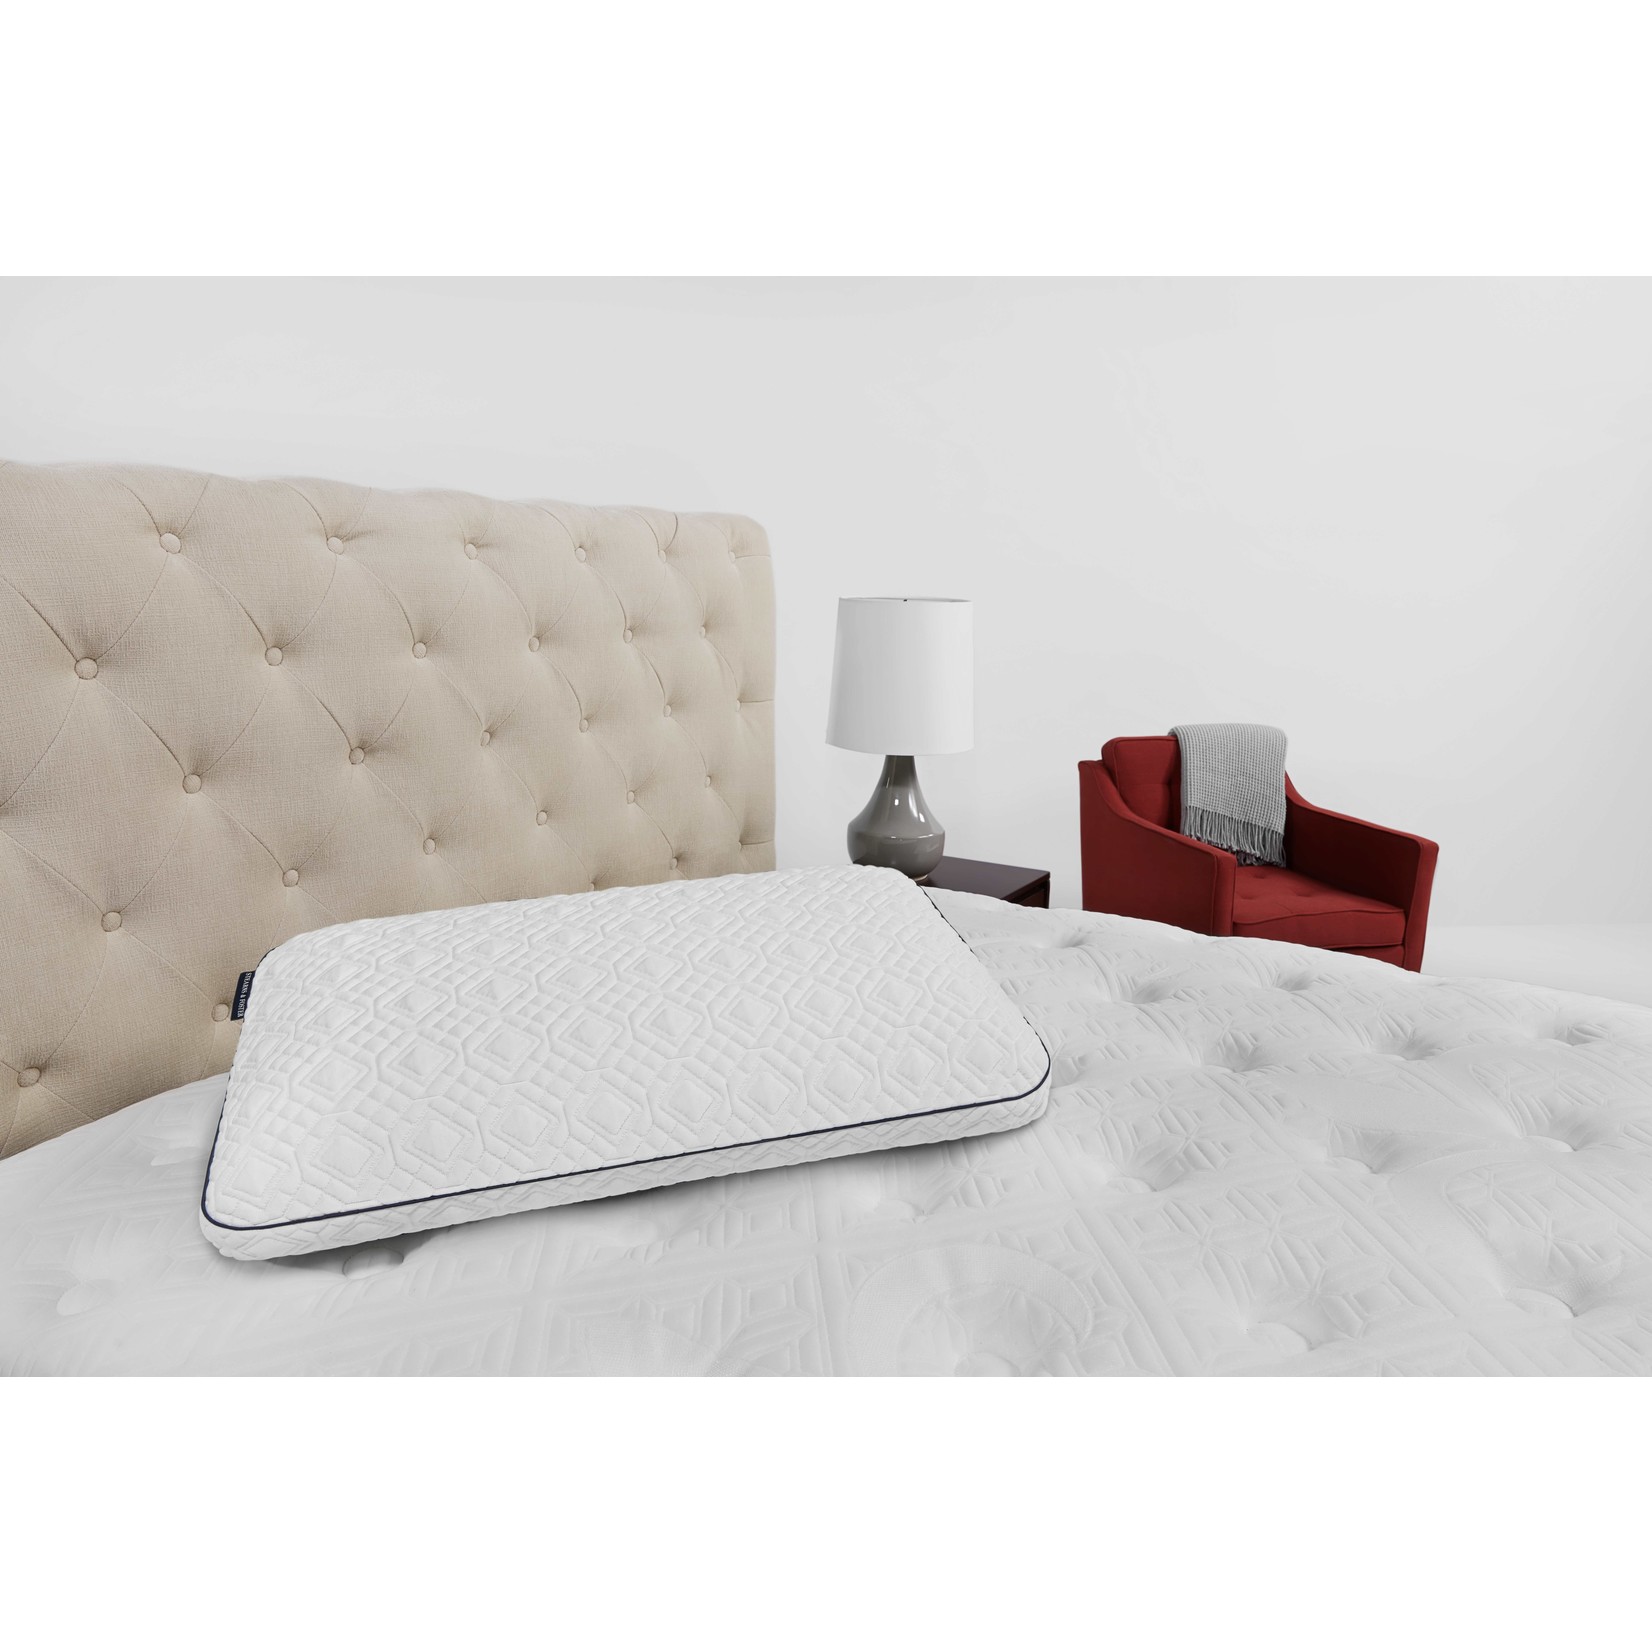 STEARNS AND FOSTER STEARNS & FOSTER LATEX PILLOW